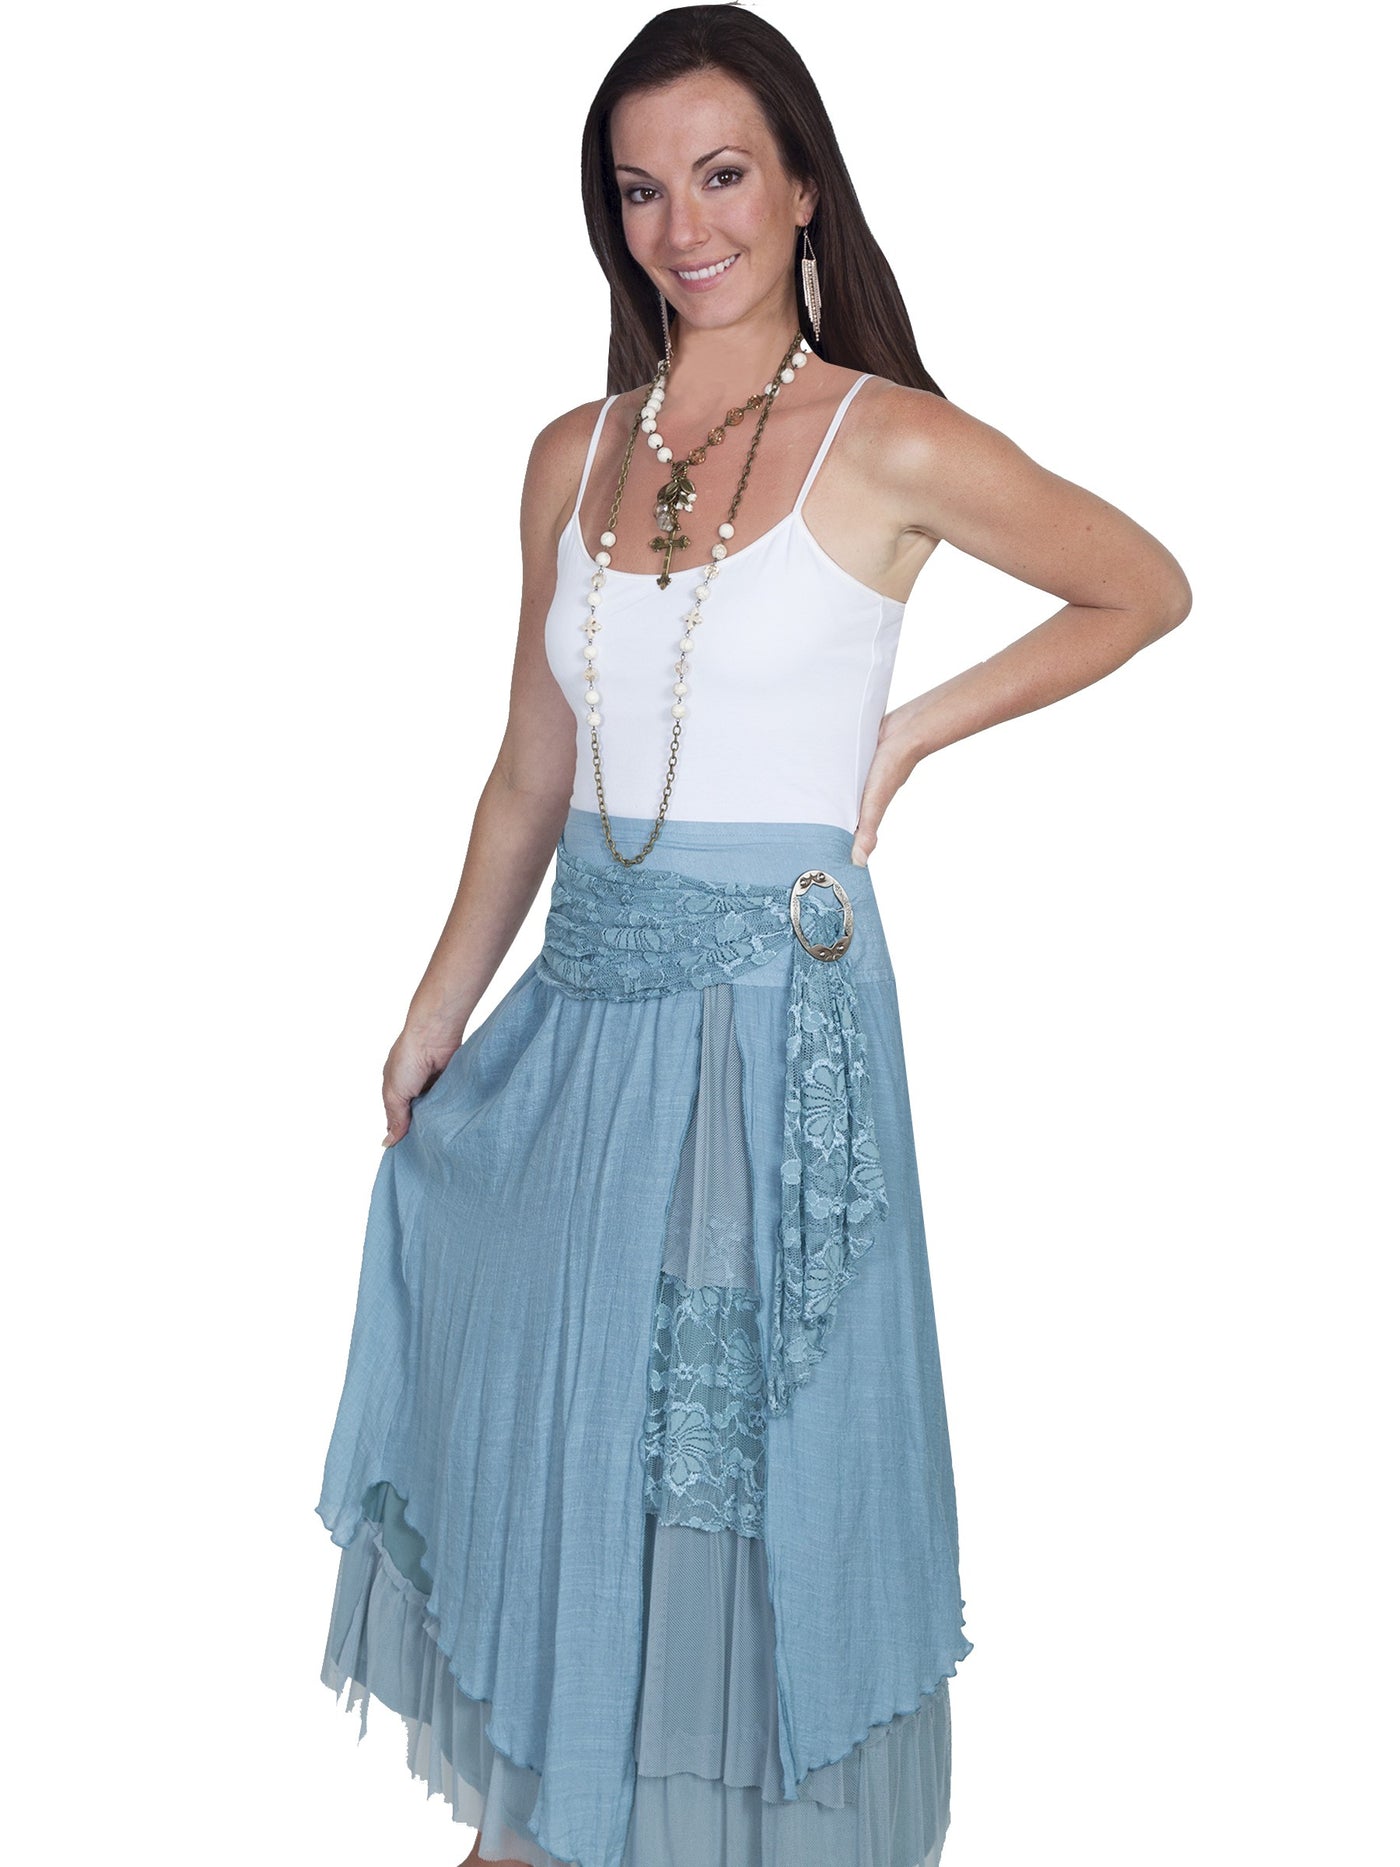 Western Style Multi-Layered Skirt in Blue - SOLD OUT